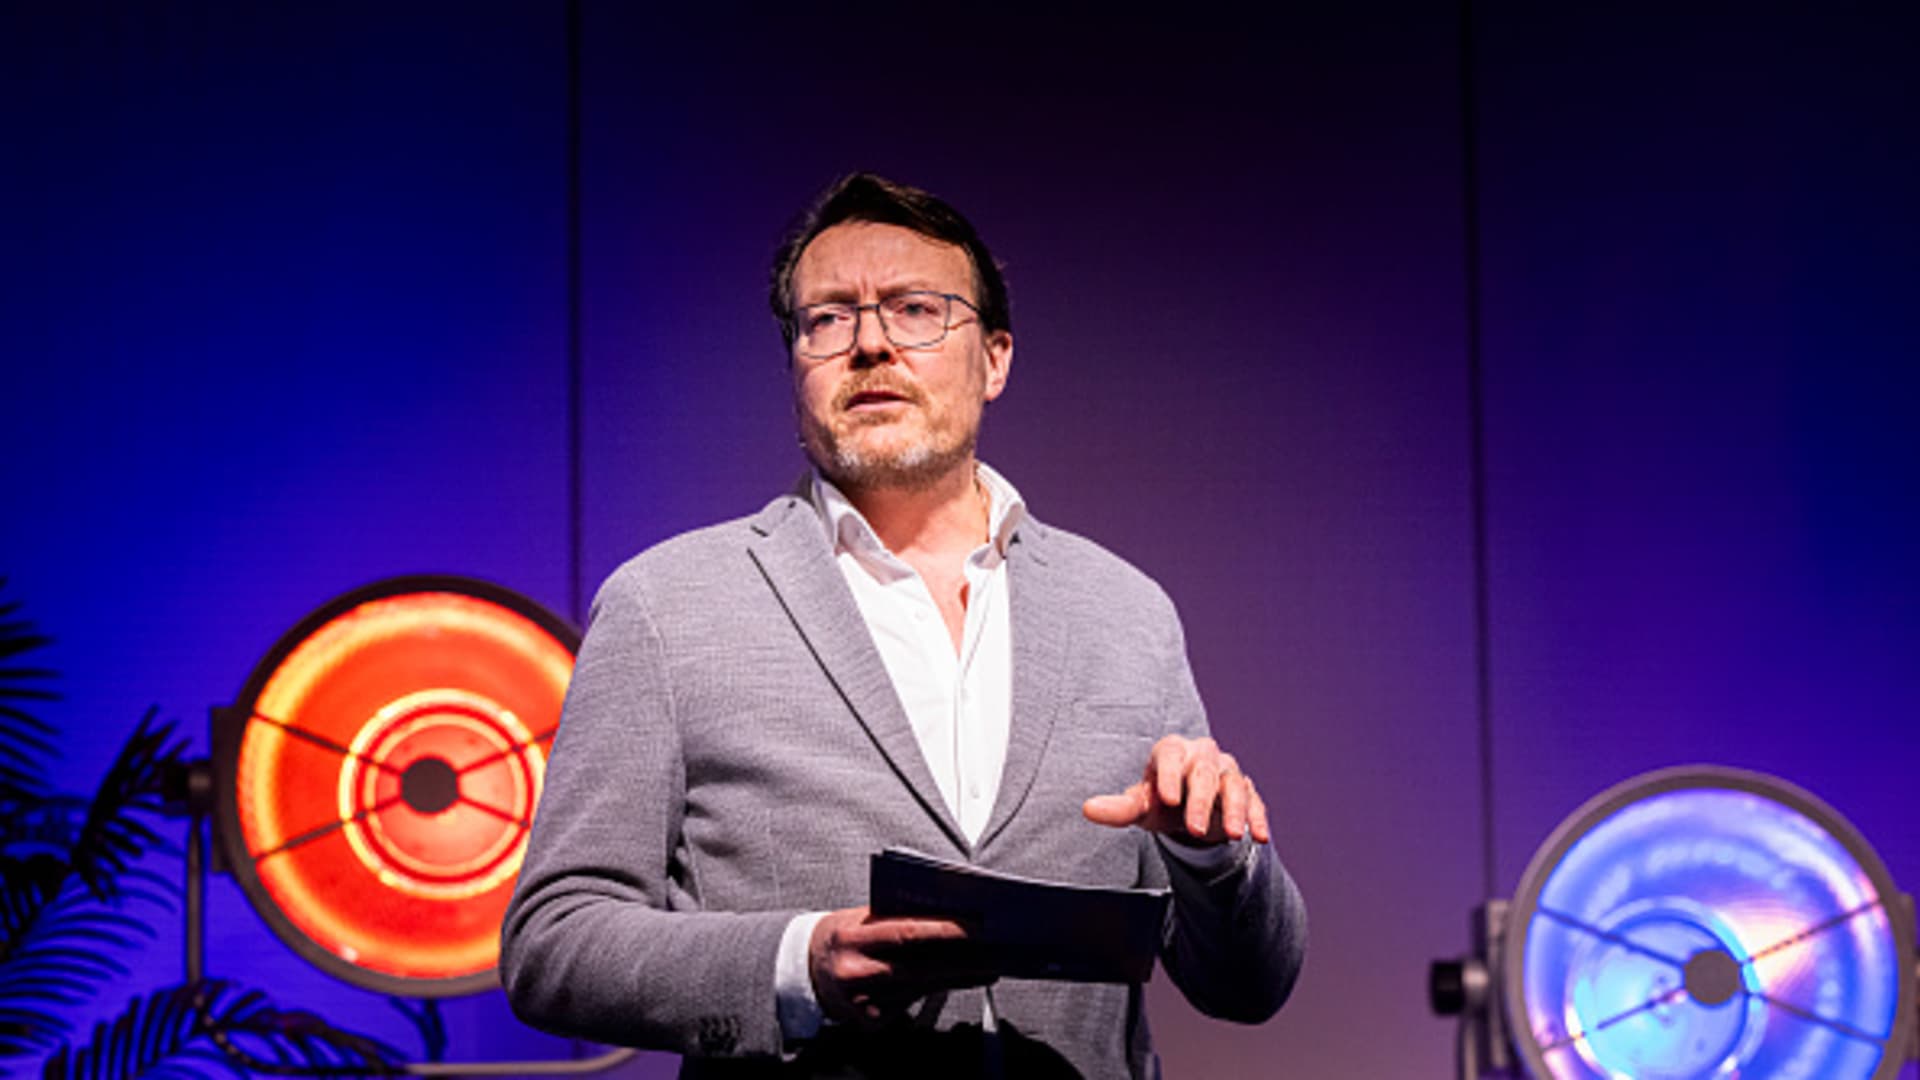 Prince Constantijn of the Netherlands, a special envoy to Techleap startup accelerator, says Europe risks falling behind the US and China by over-regulating AI (Ryan Browne/CNBC)